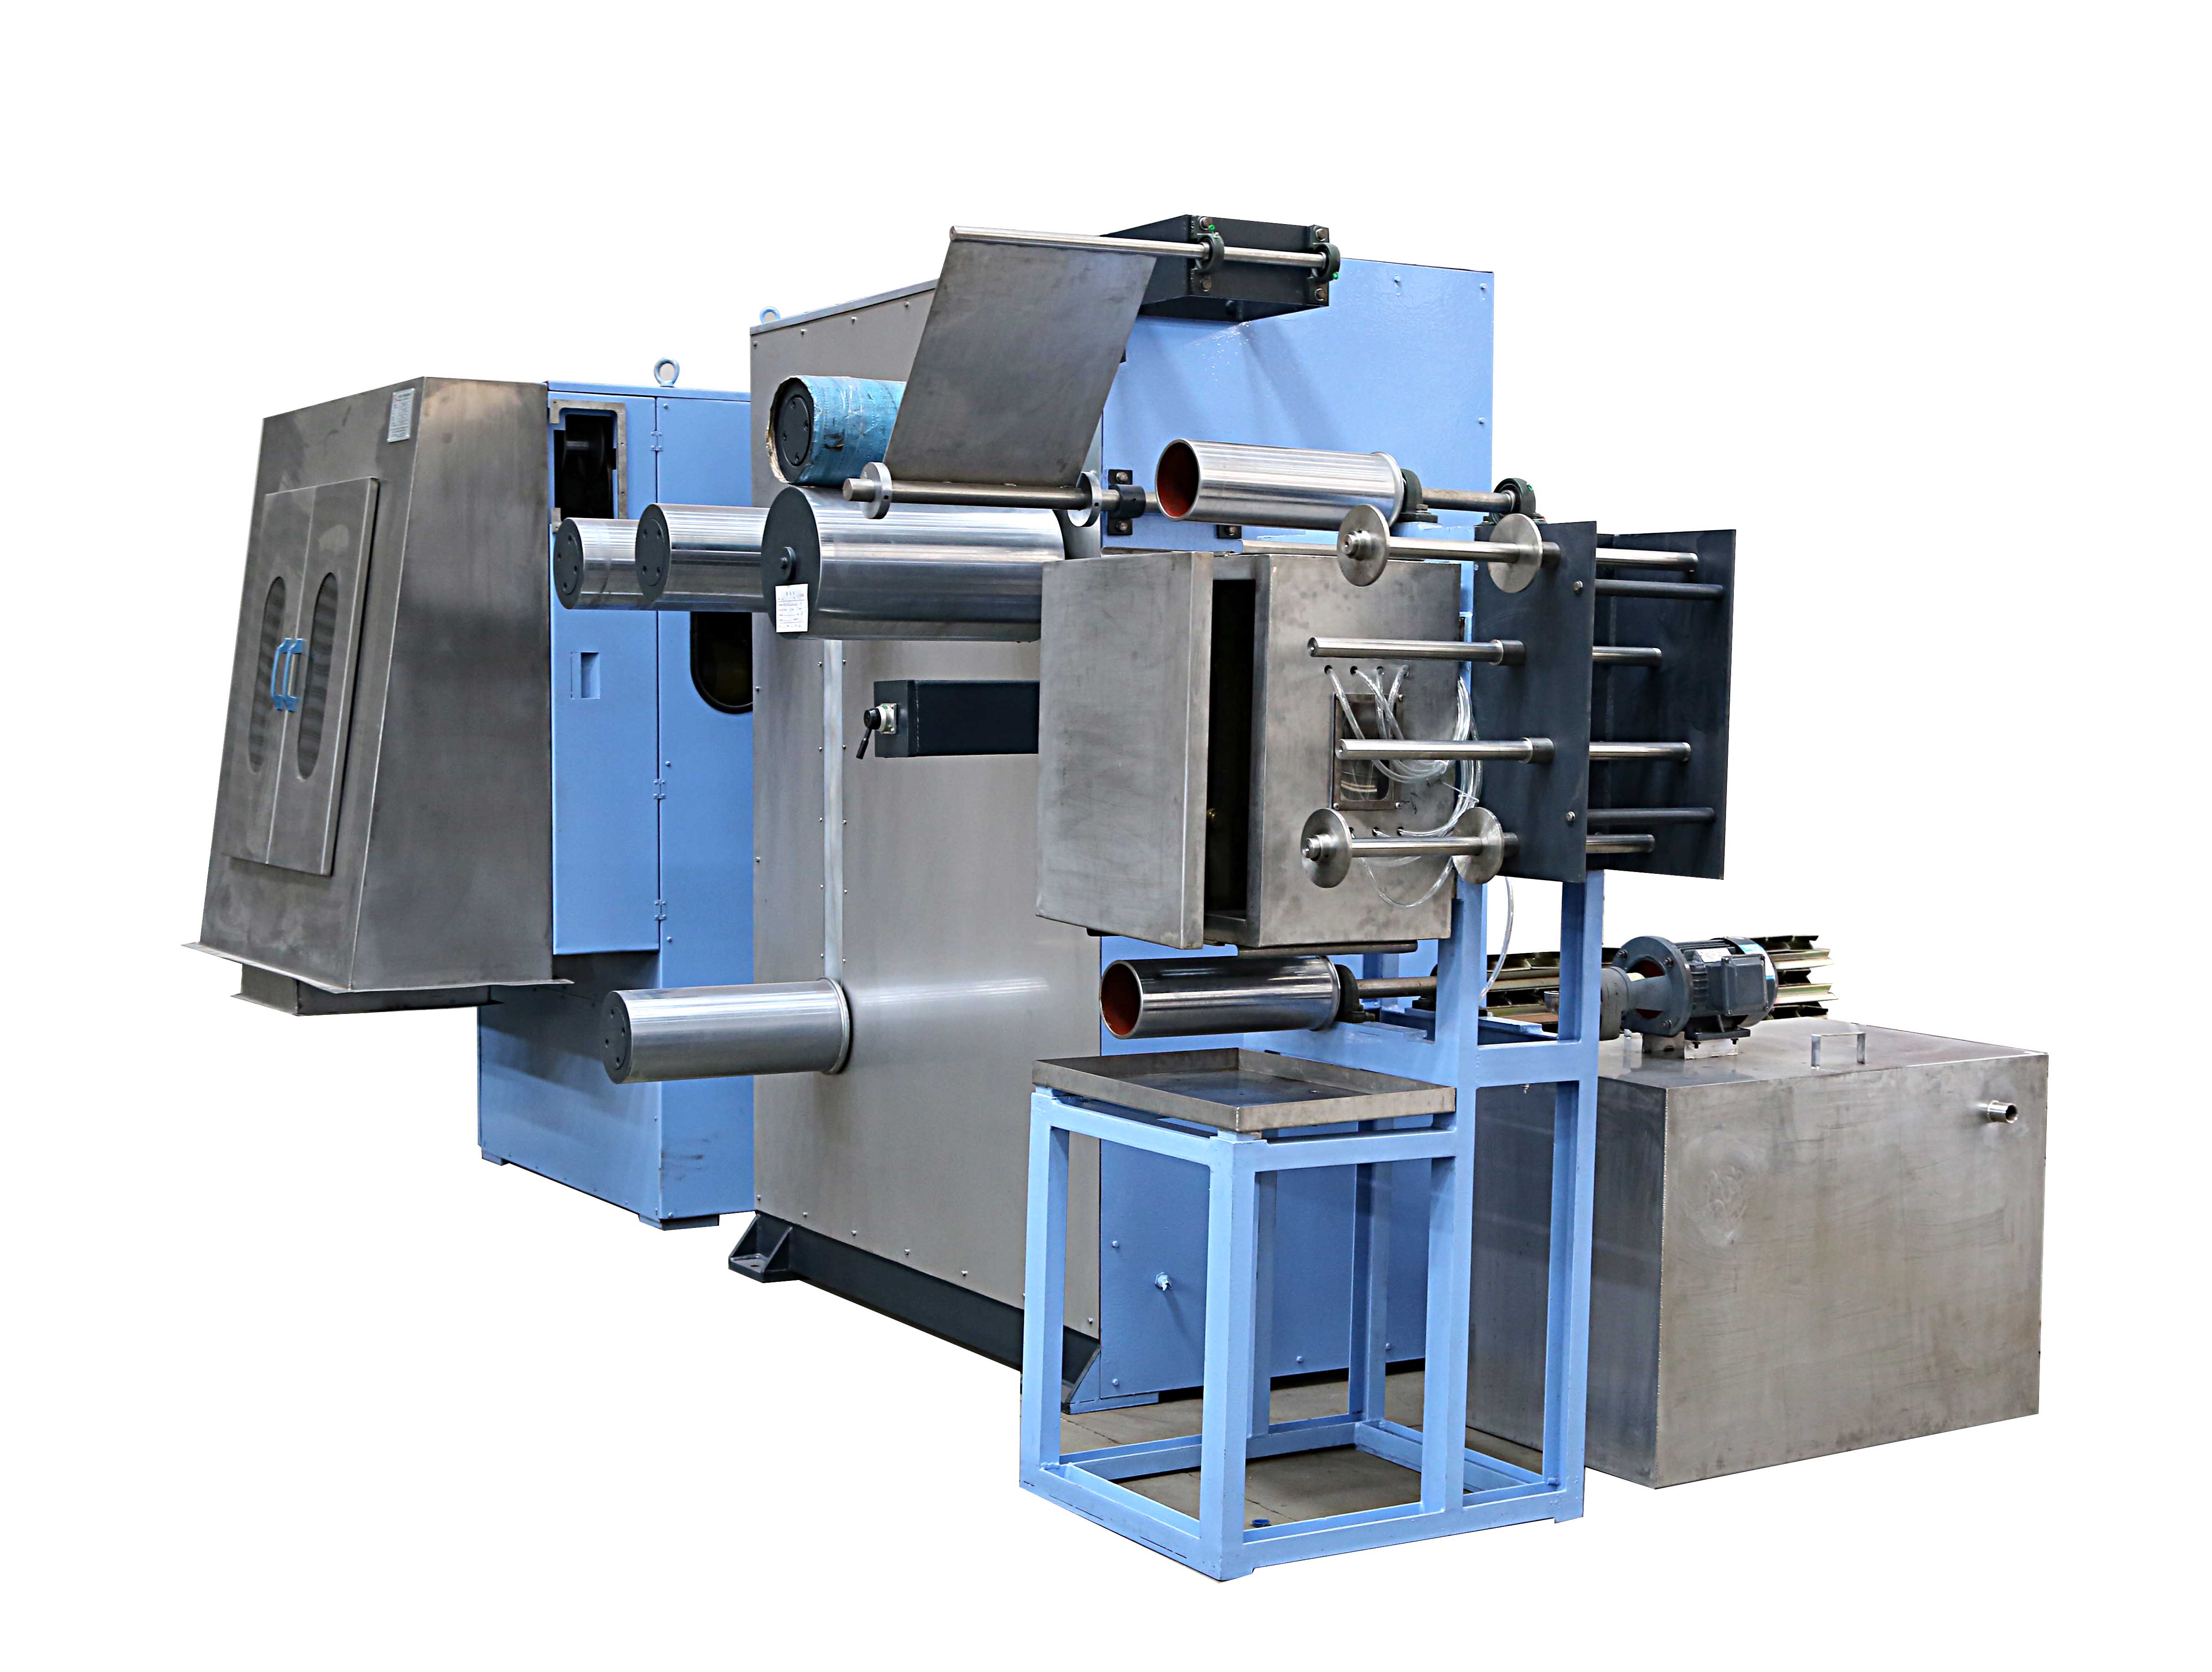 Fiber cutters for Hollow Conjugated Silicon Fiber production line, Polyester staple fiber production line